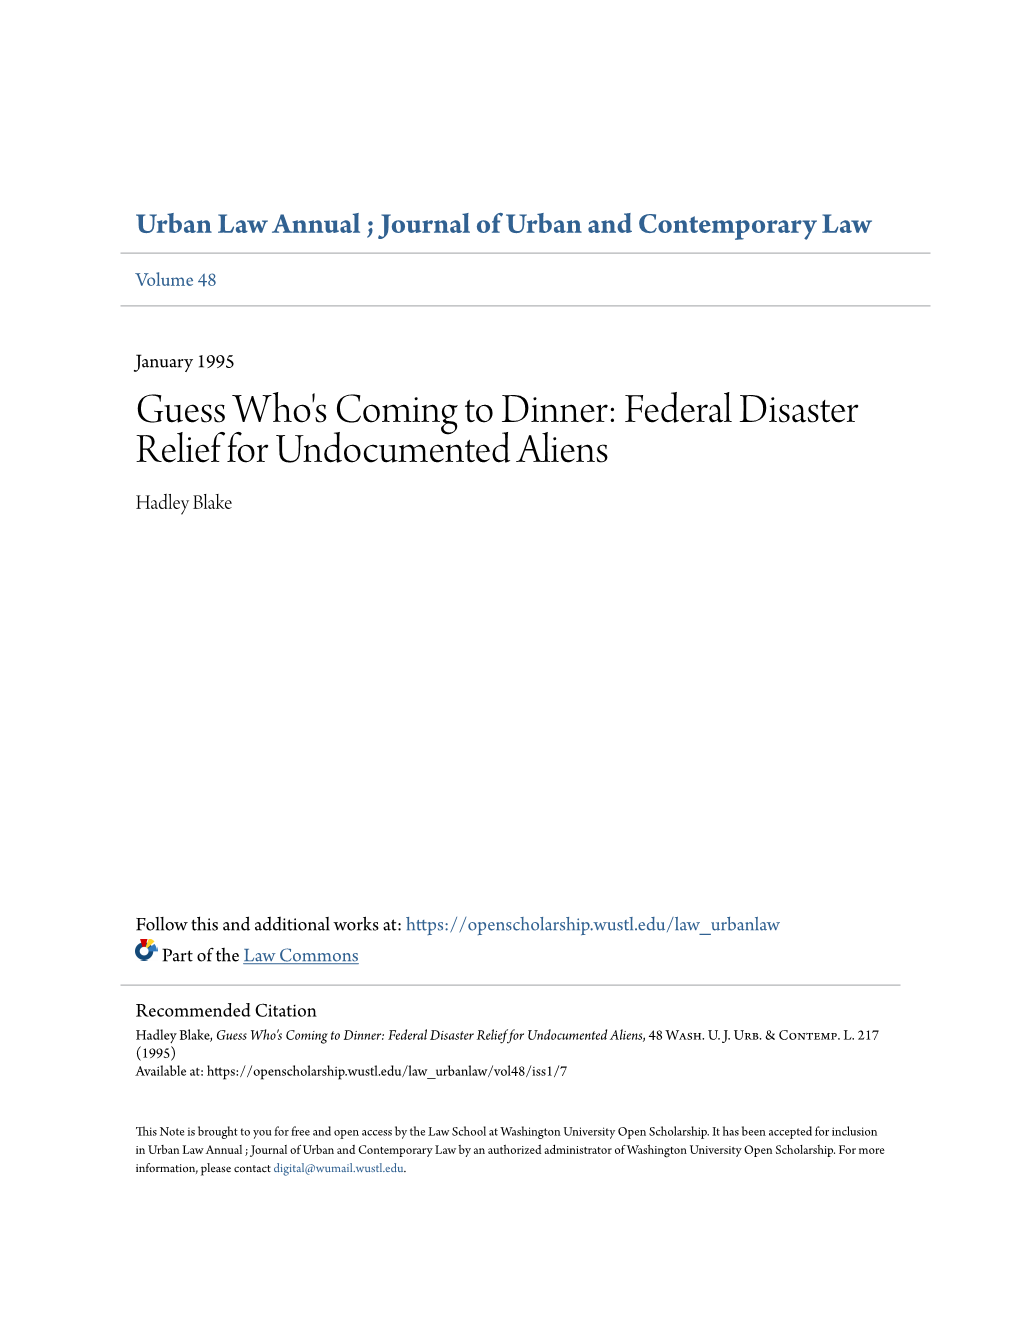 Federal Disaster Relief for Undocumented Aliens Hadley Blake